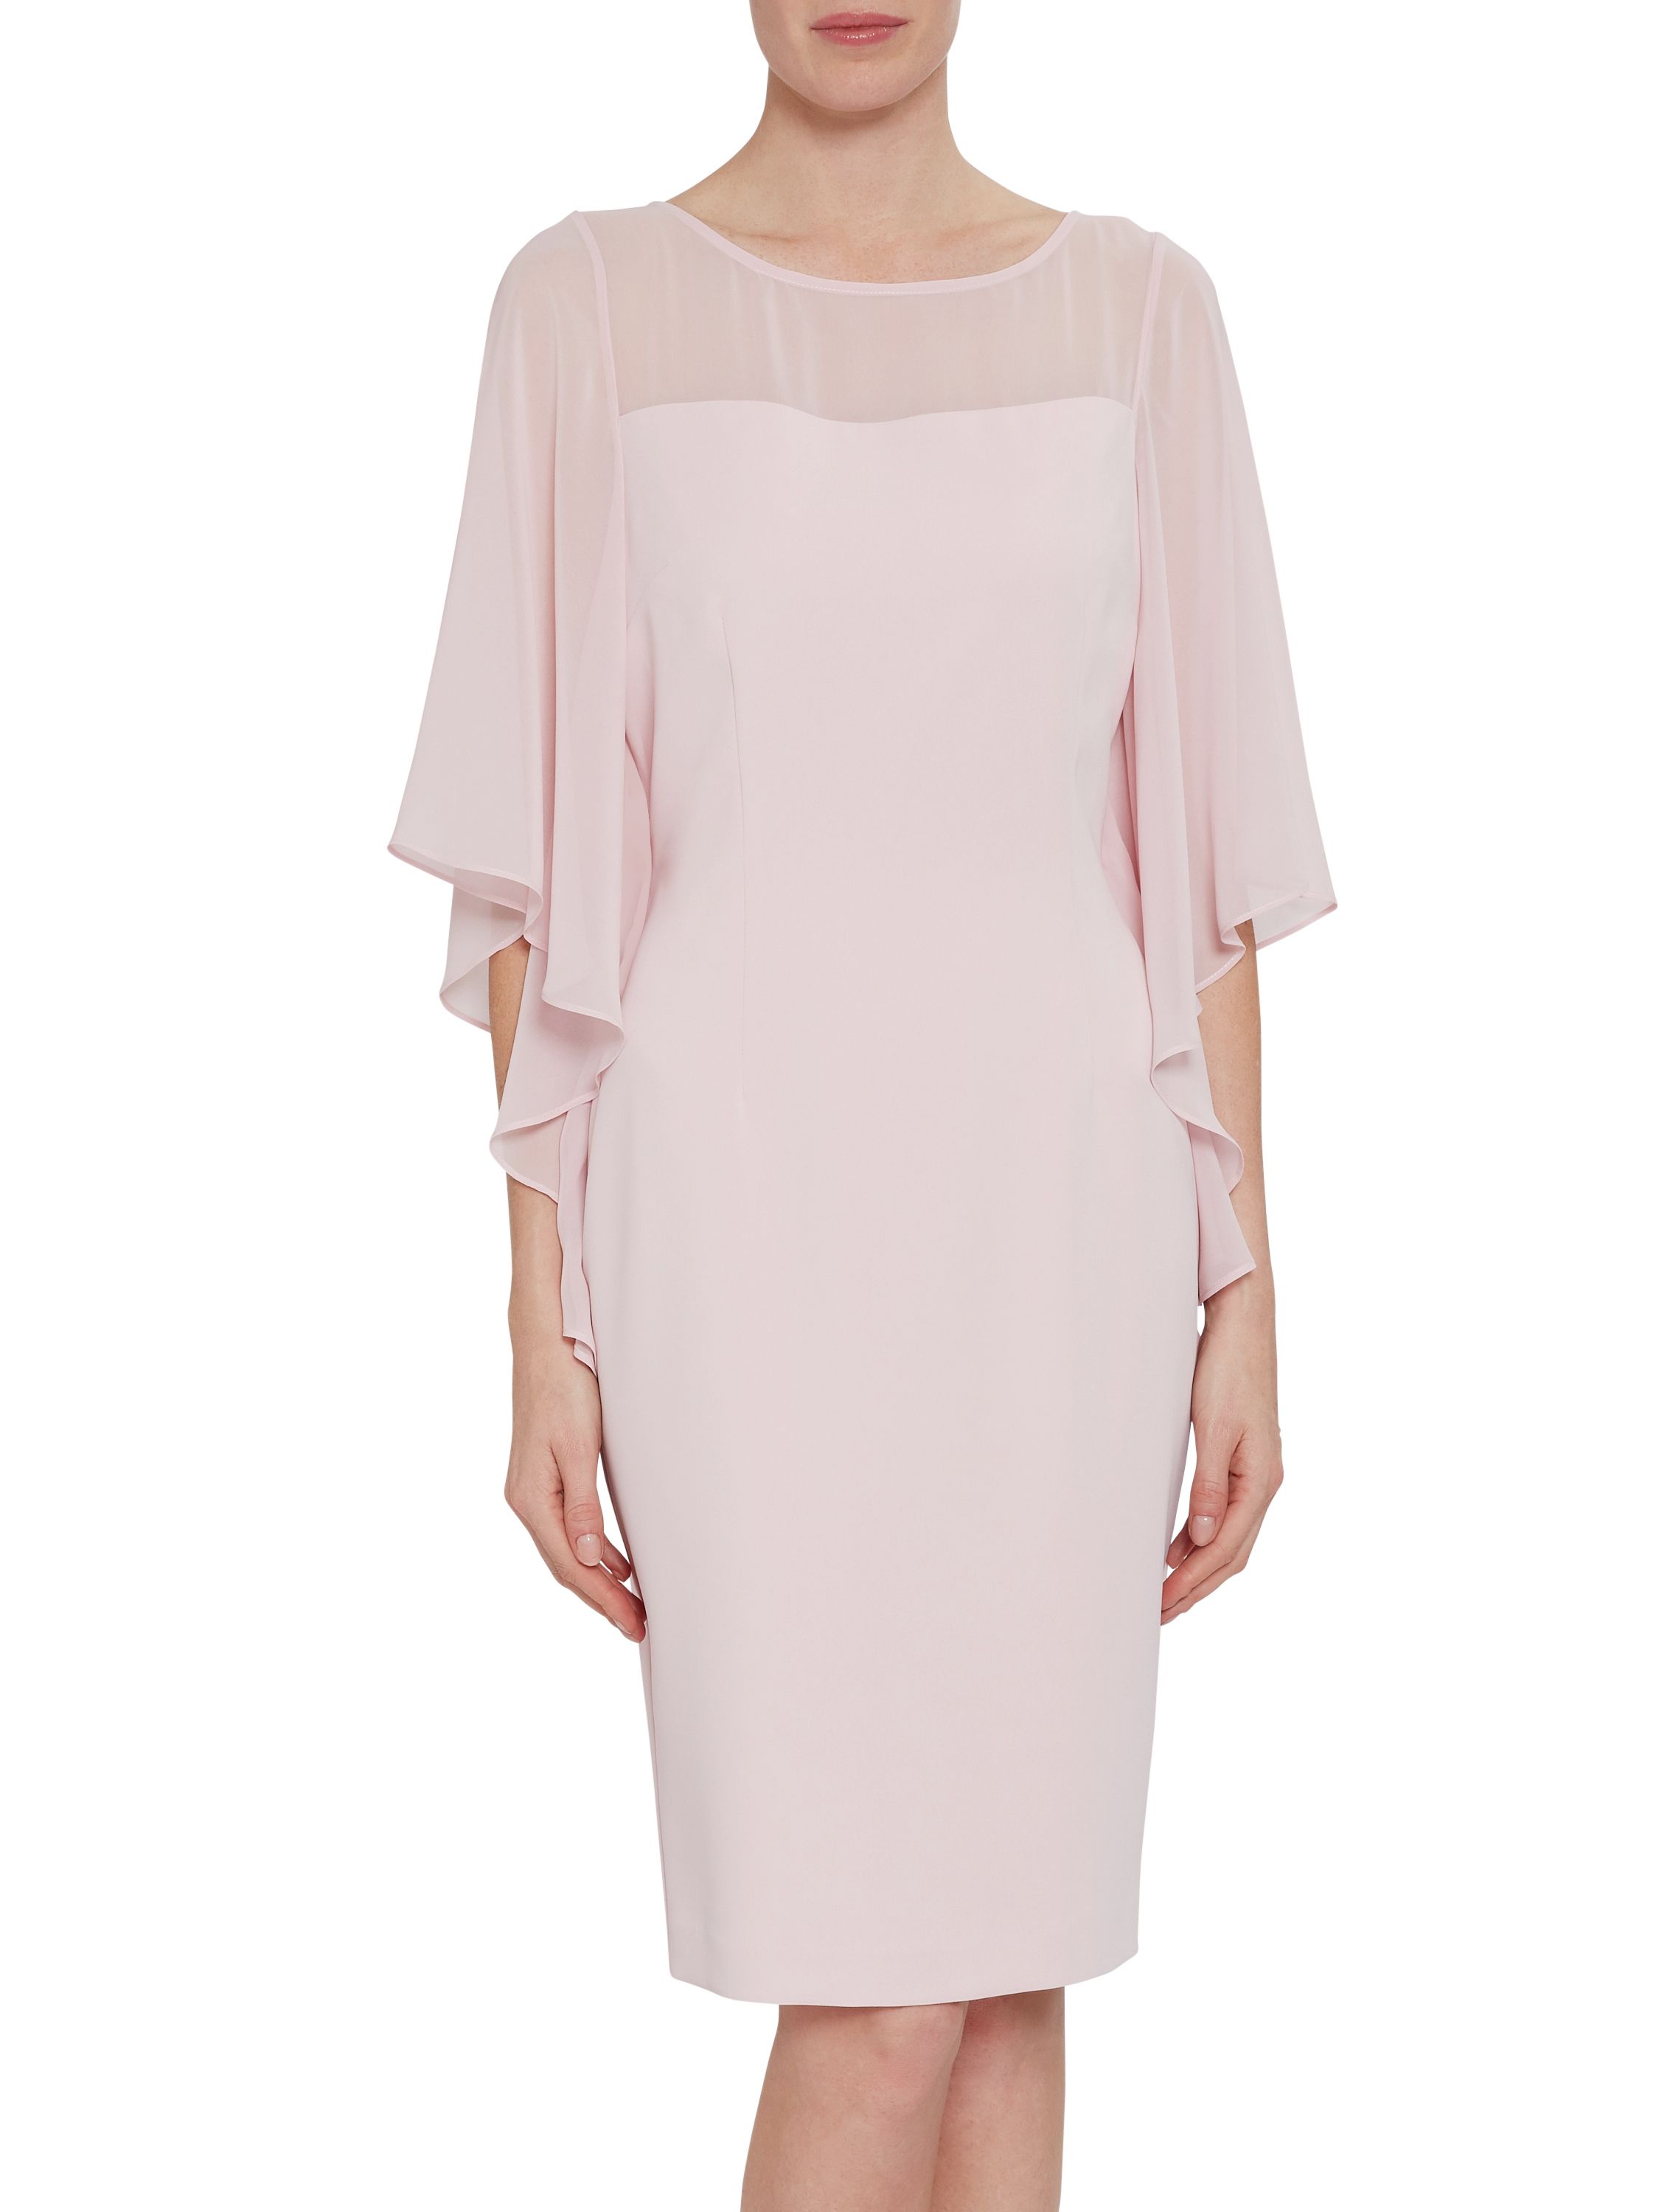 Feel stunning in this gorgeous dress by Gina Bacconi. This beautifully fitted jersey dress has cape like sleeves which flow gracefully at the sides of the bodice. It features elegant gathering on the left hand side on the dress both of the front and back of the dress creating a feminine silhouette. This dress is fully lined and has a buttoned keyhole fastening.